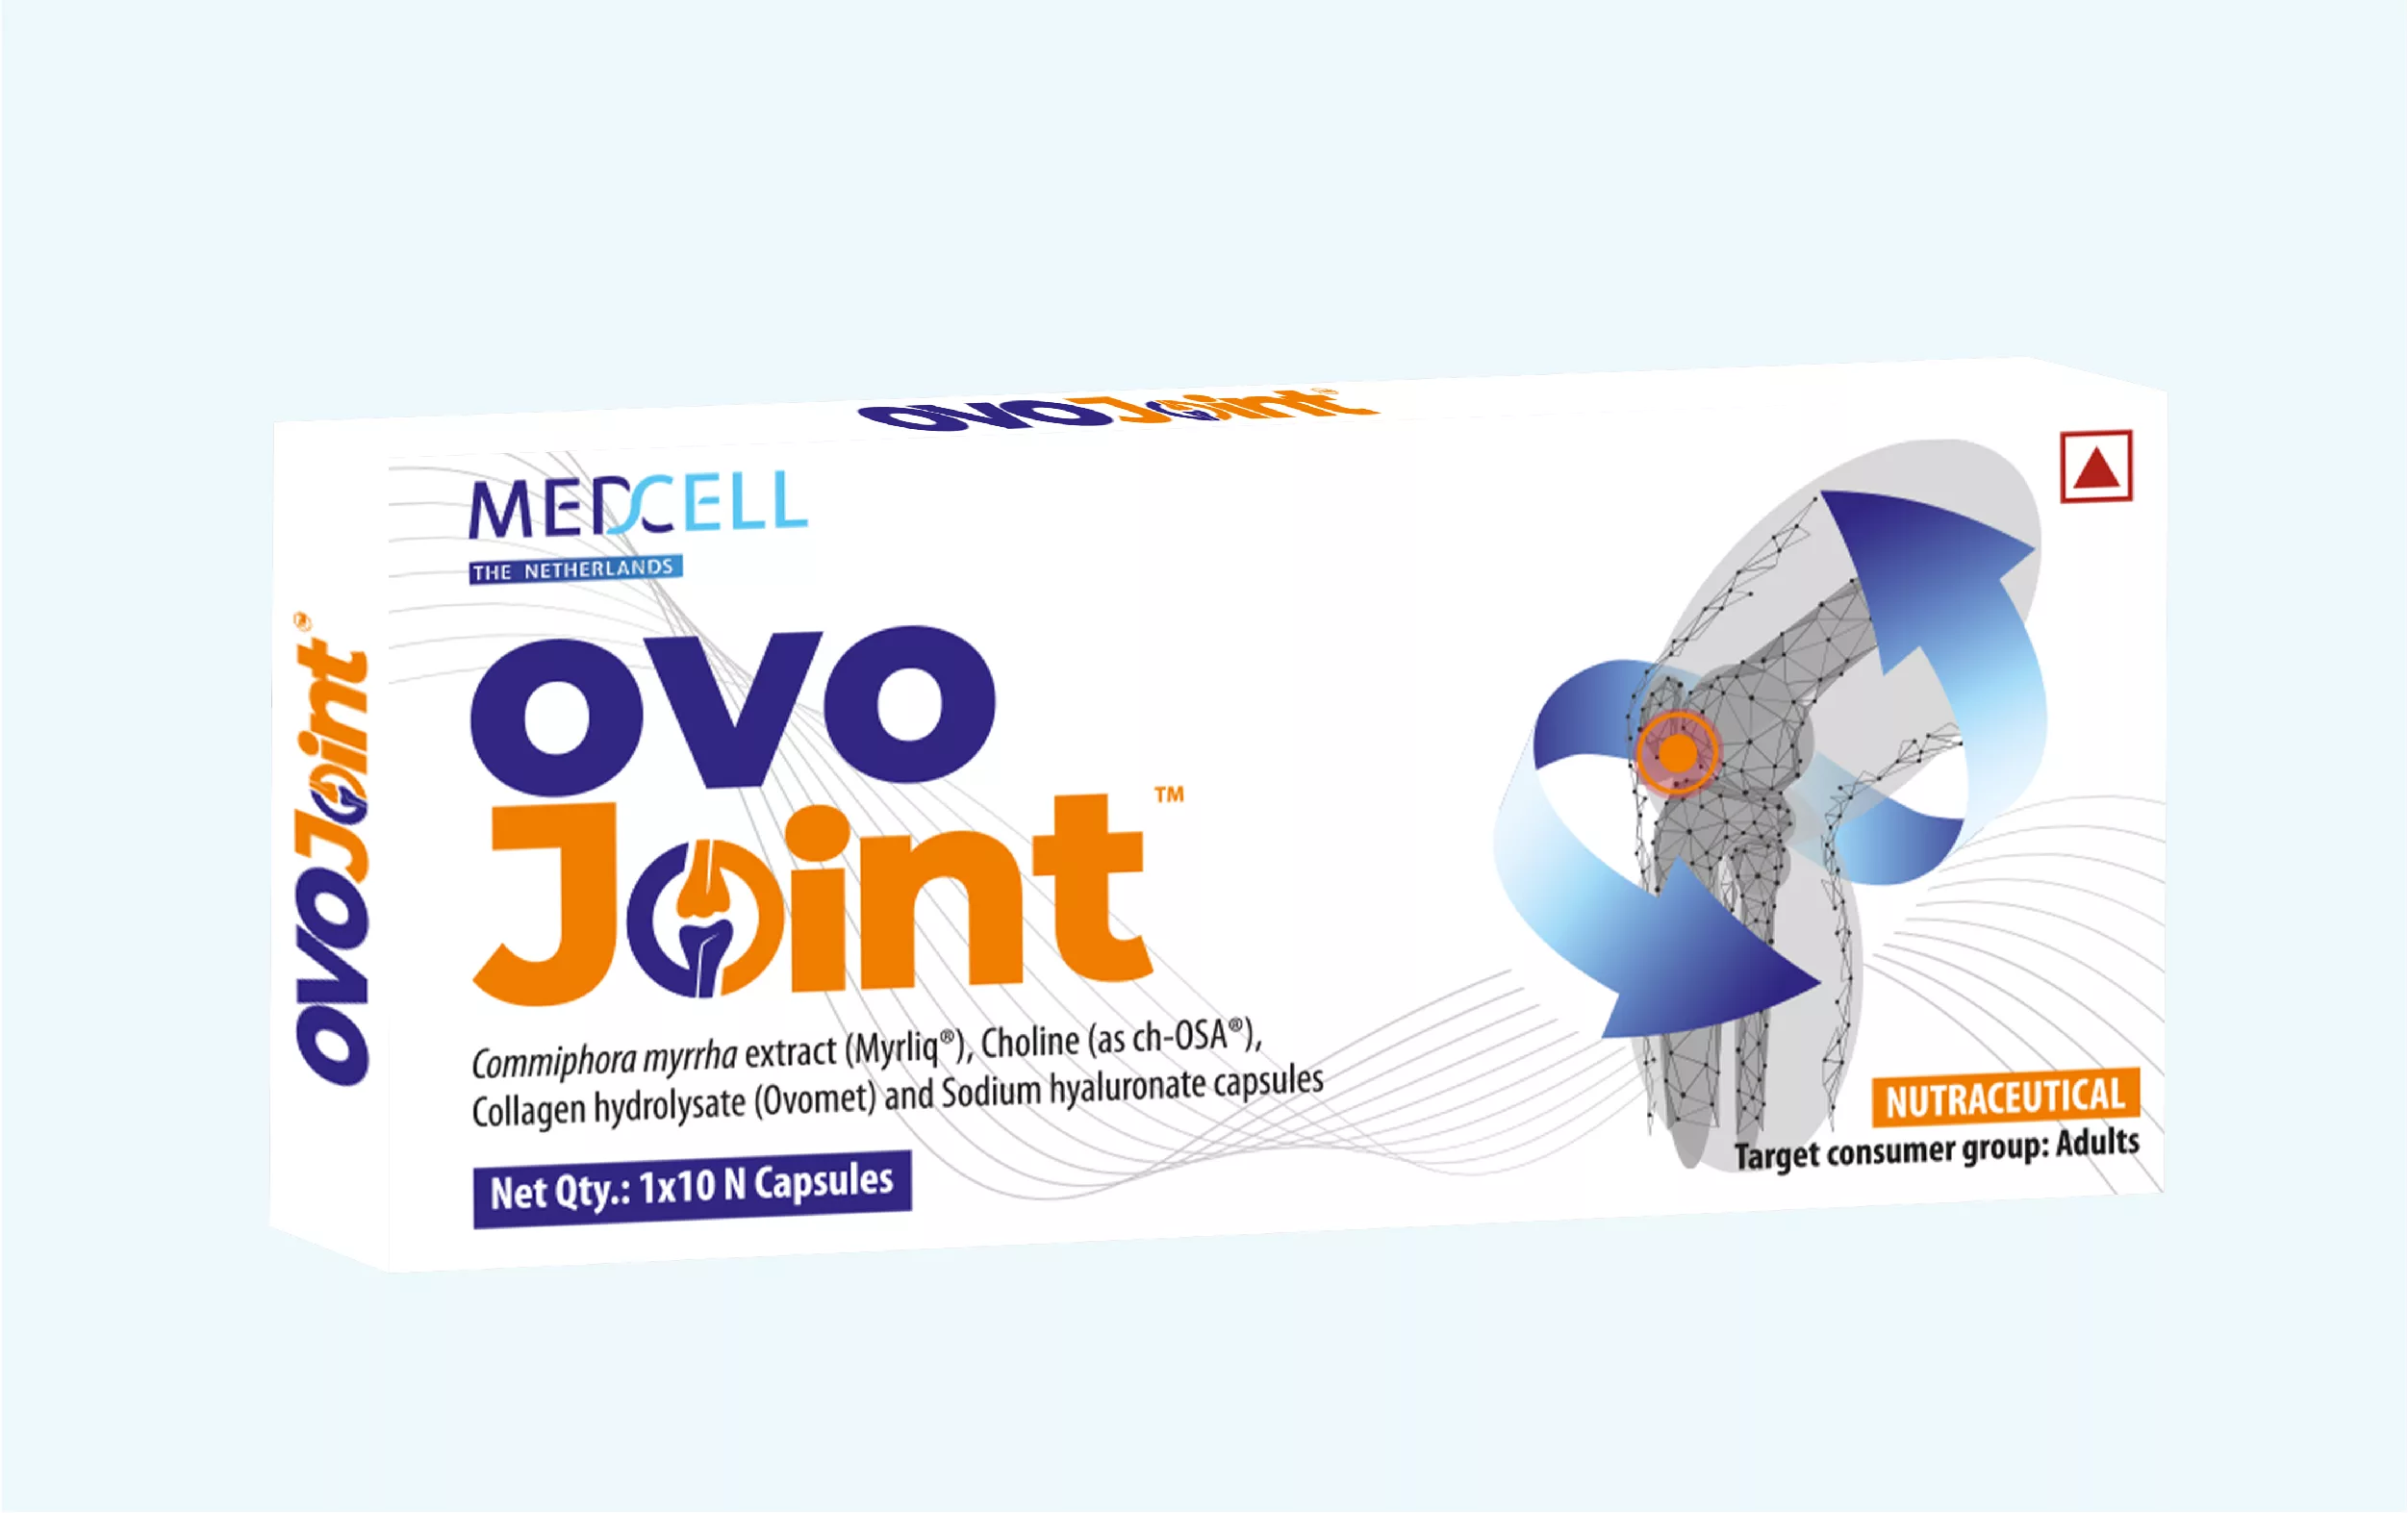 OVO-JOINT for joint health care osteoarthritis treatment and osteopenia treatment super speciality